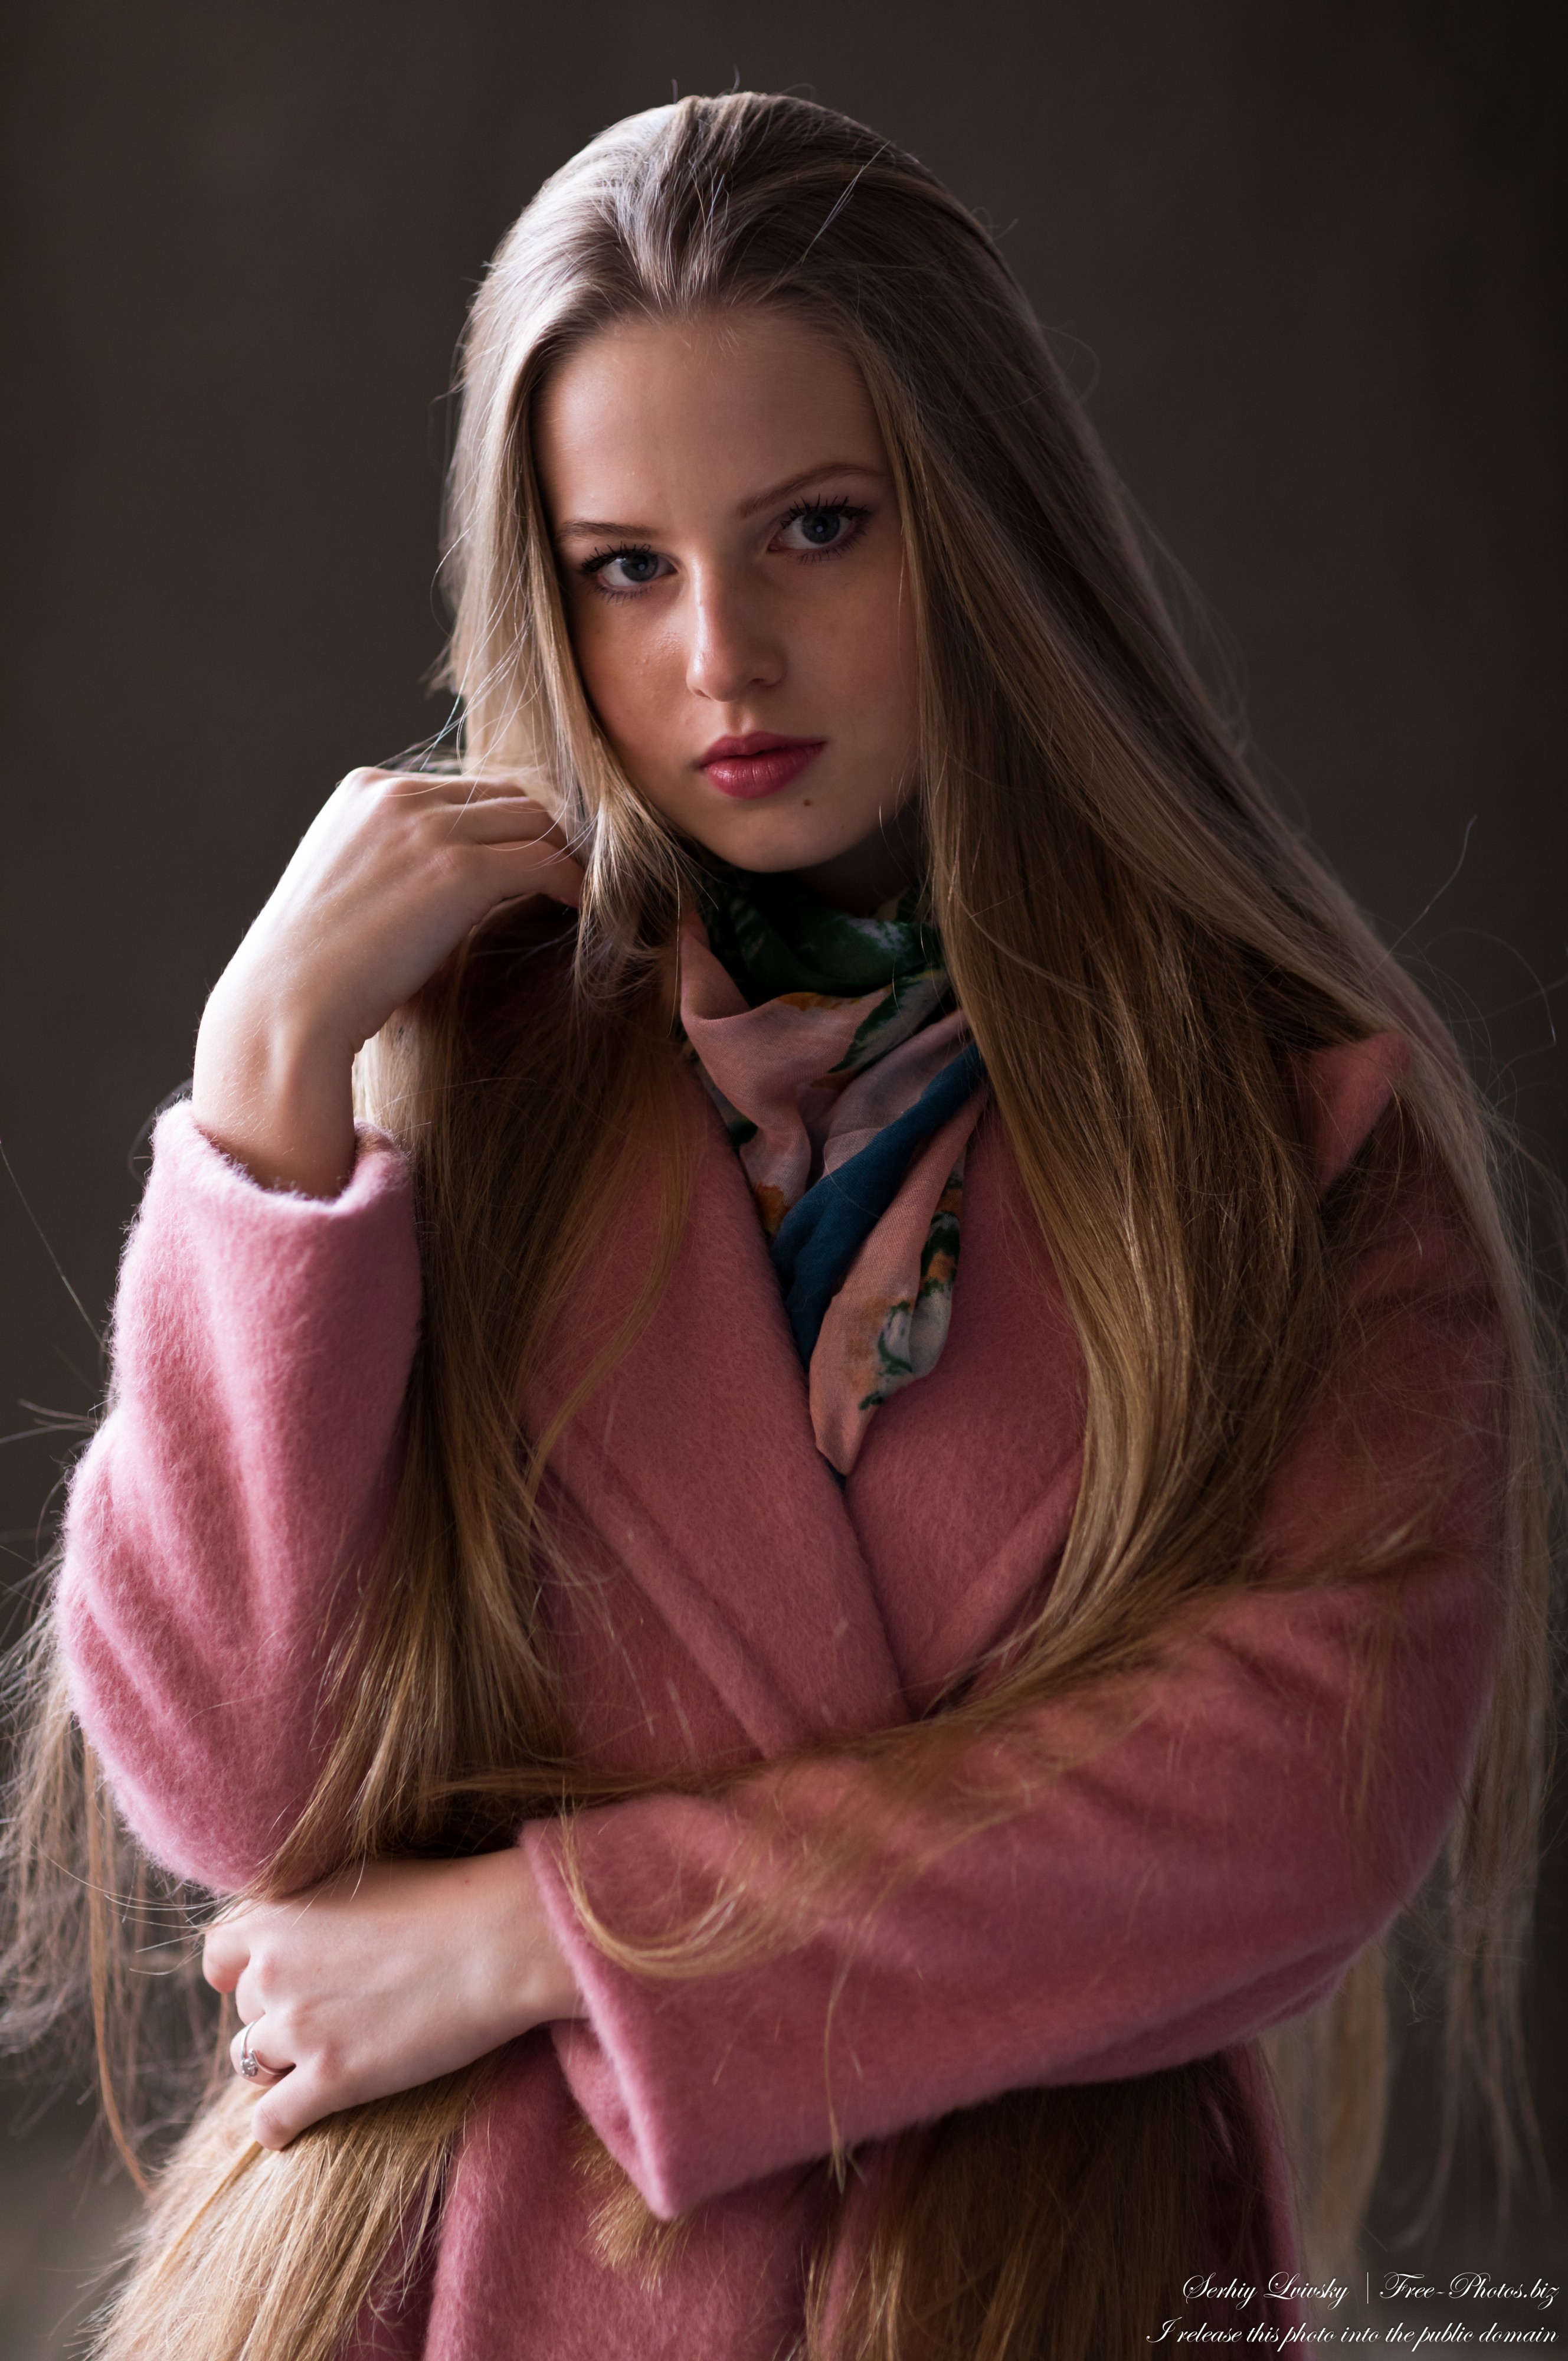 Photo Of Diana An 18 Year Old Natural Blonde Girl Photographed In October 2020 By Serhiy